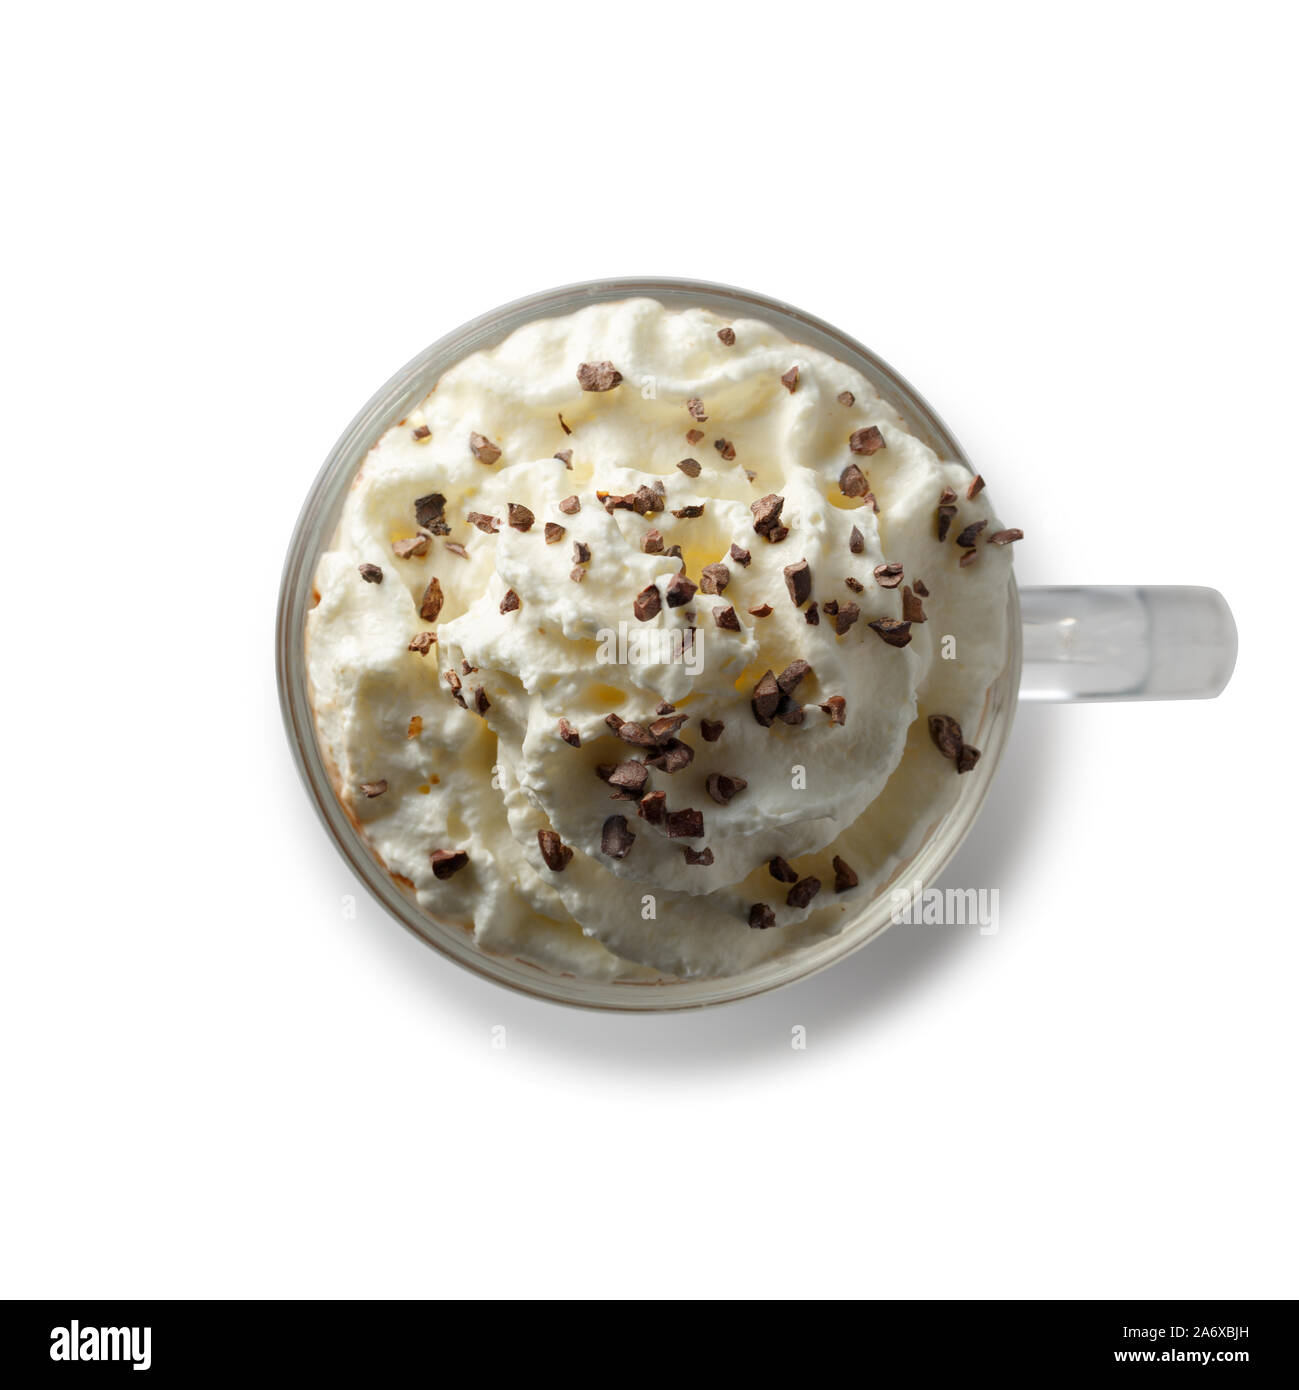 Glass with Espresso con panna sprinkled with chocolate chips. Also known as Vienne, Viennois or Franziskaner. Isolated on white background. Top view. Stock Photo